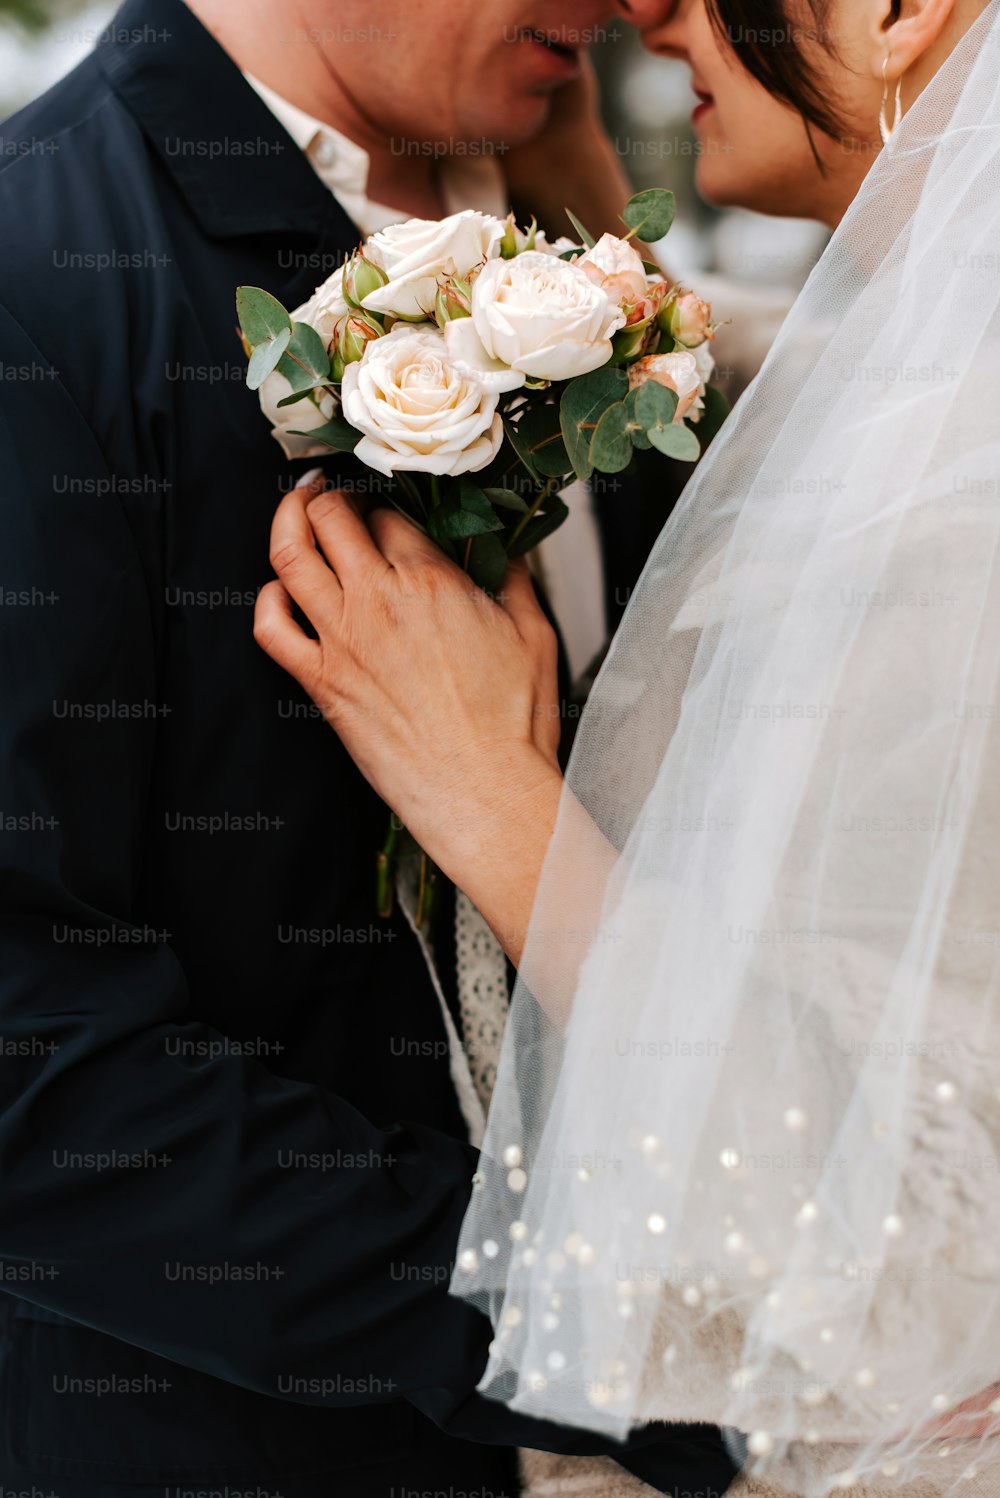 a bride and groom embracing each other